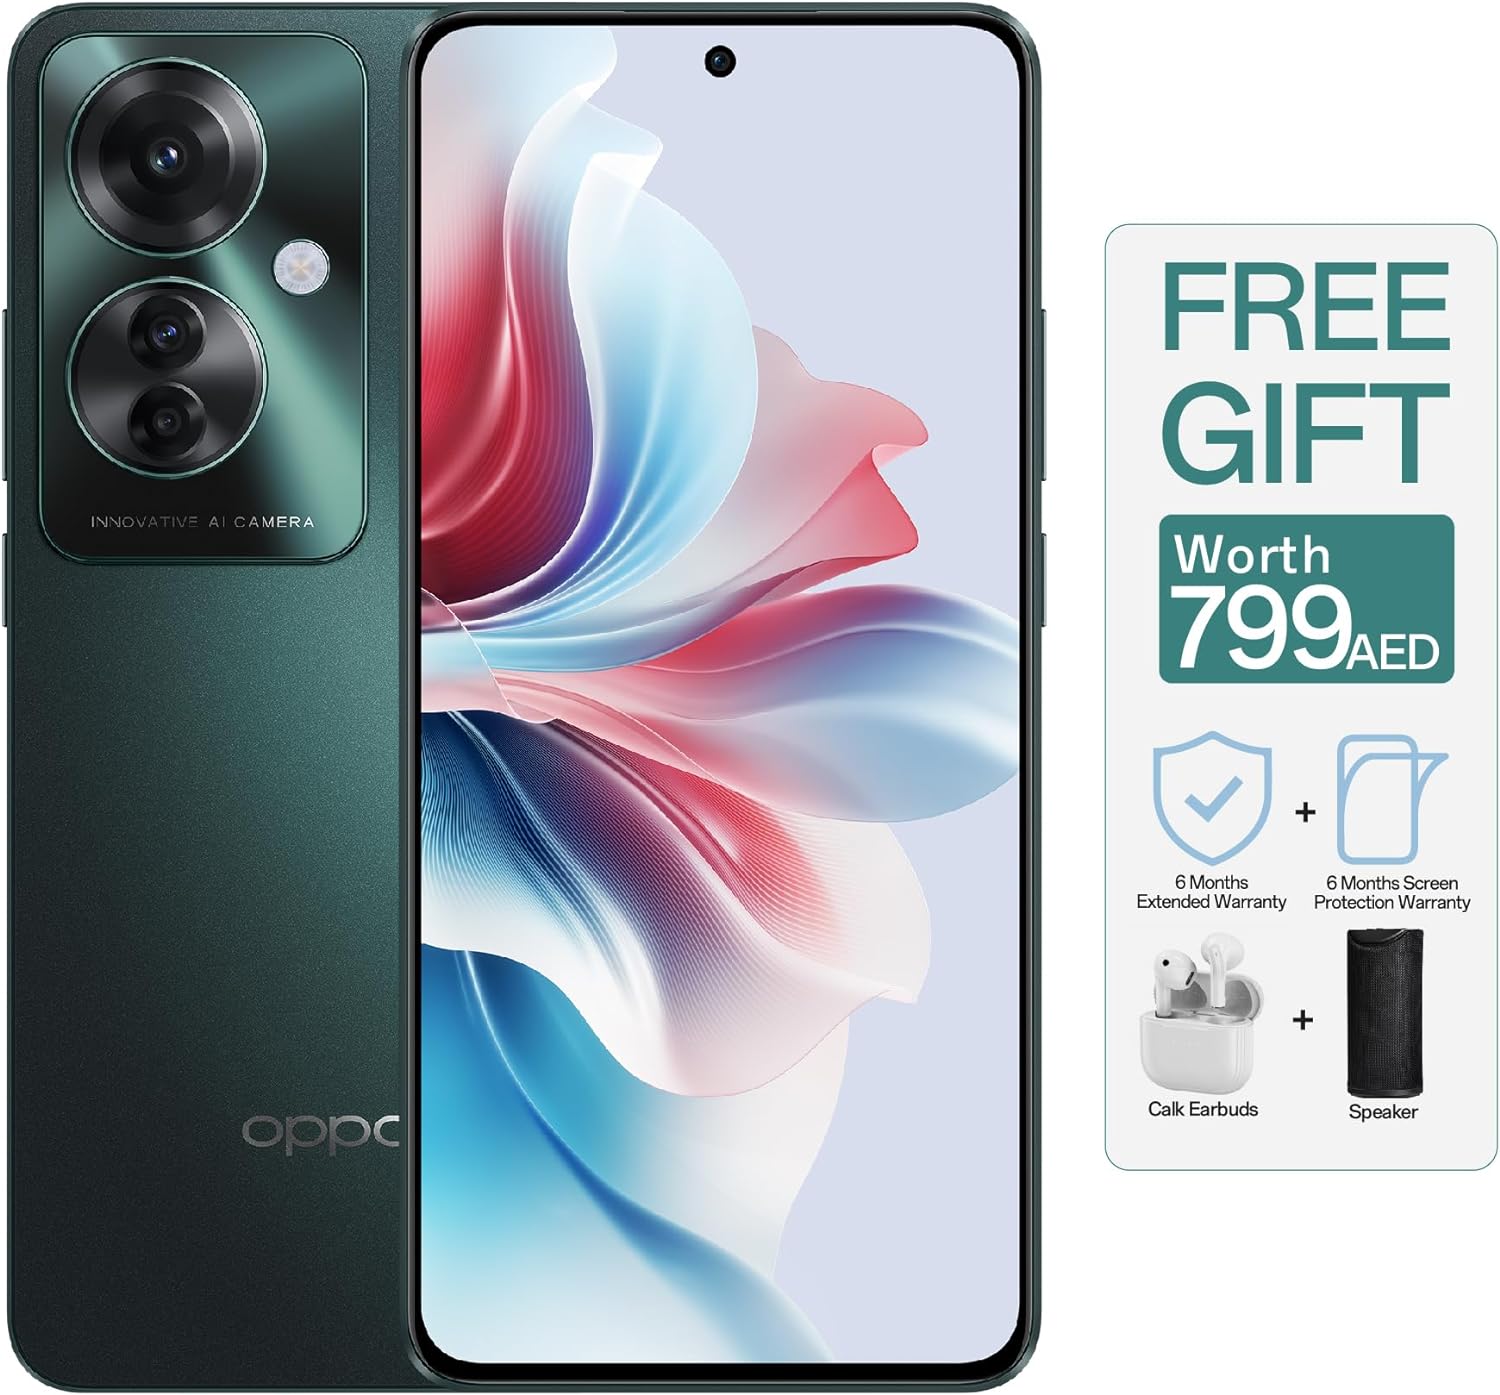 Oppo Reno11 F 5G Android Smartphone Palm Green +Buds+Bluetooth Speaker+6months Extended Warranty & 6 Months Screen Protection Warranty